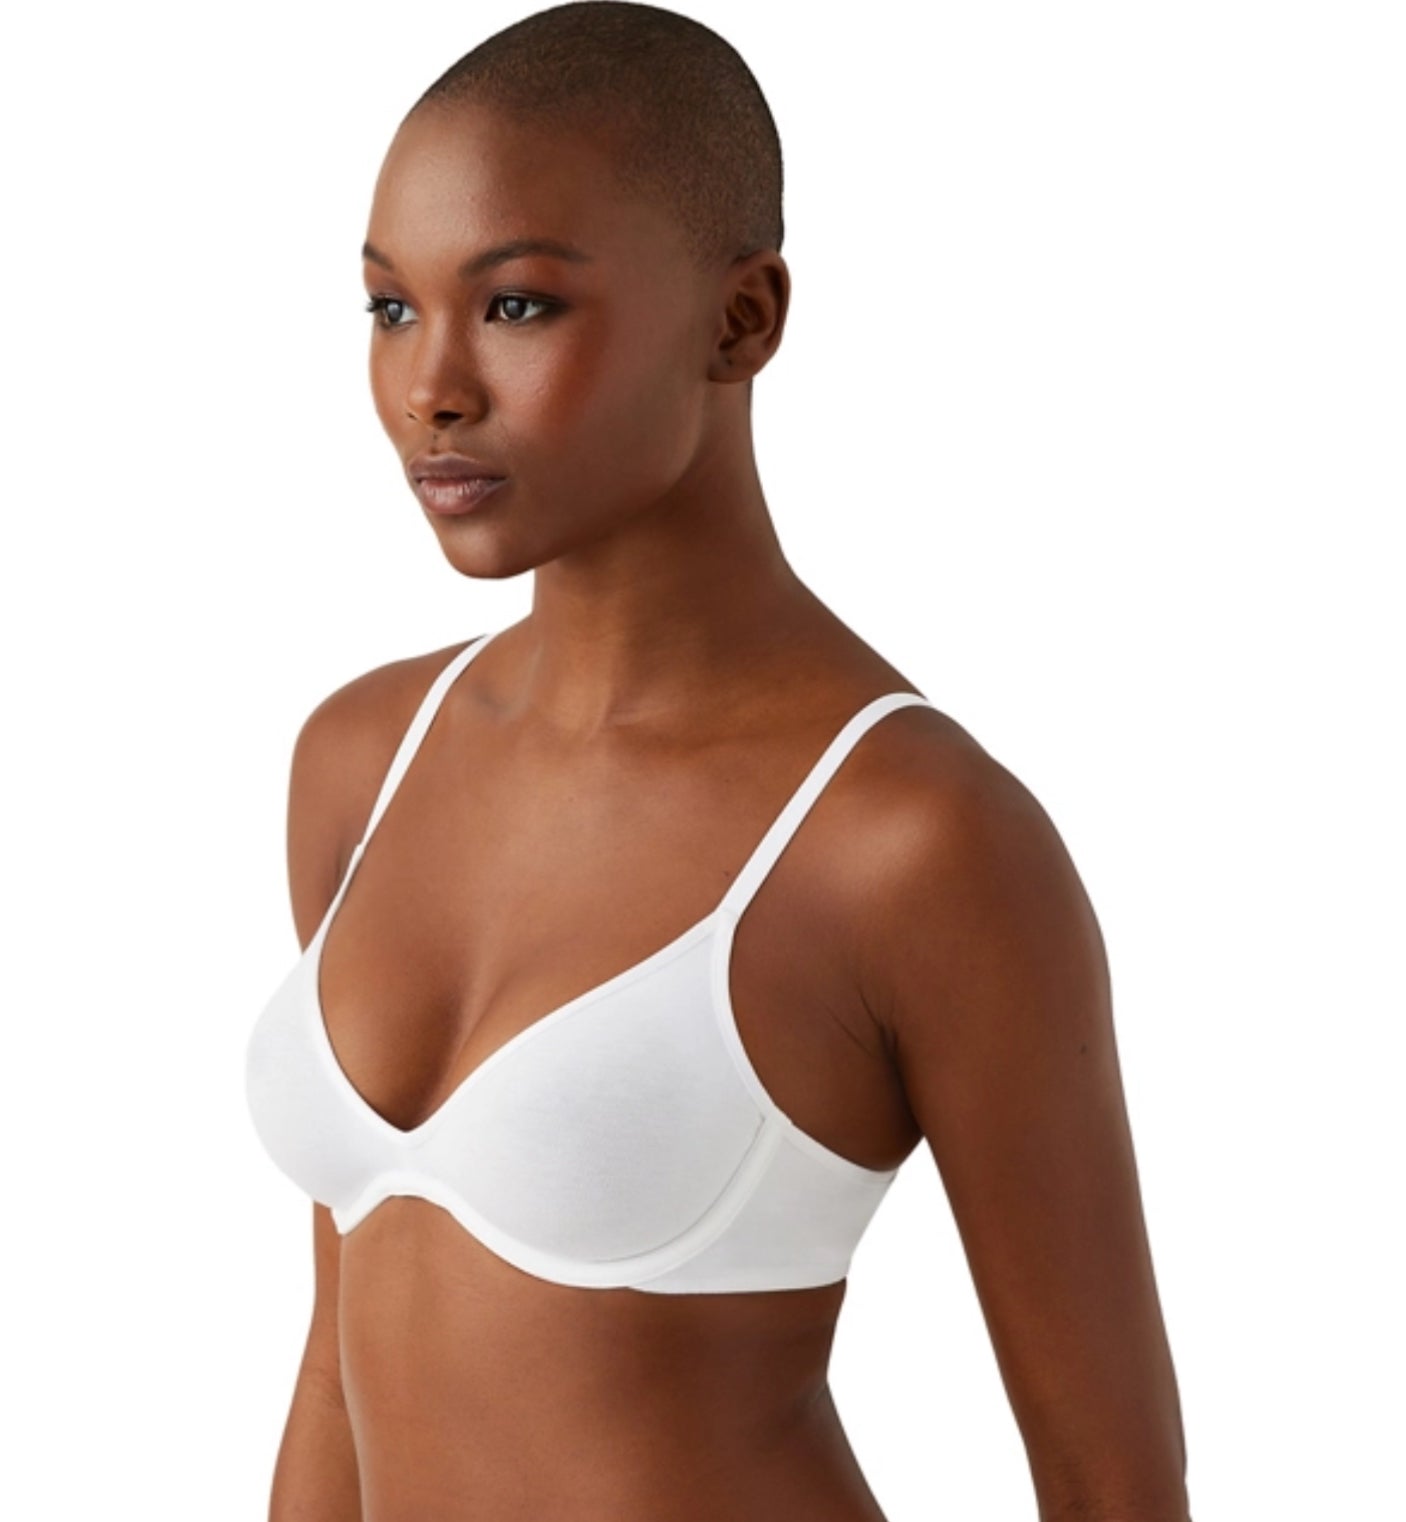 b.tempt'd 951272 Cotton To A Tee Scoop Underwire Bra in white - Blue Sky Fashions & Lingerie